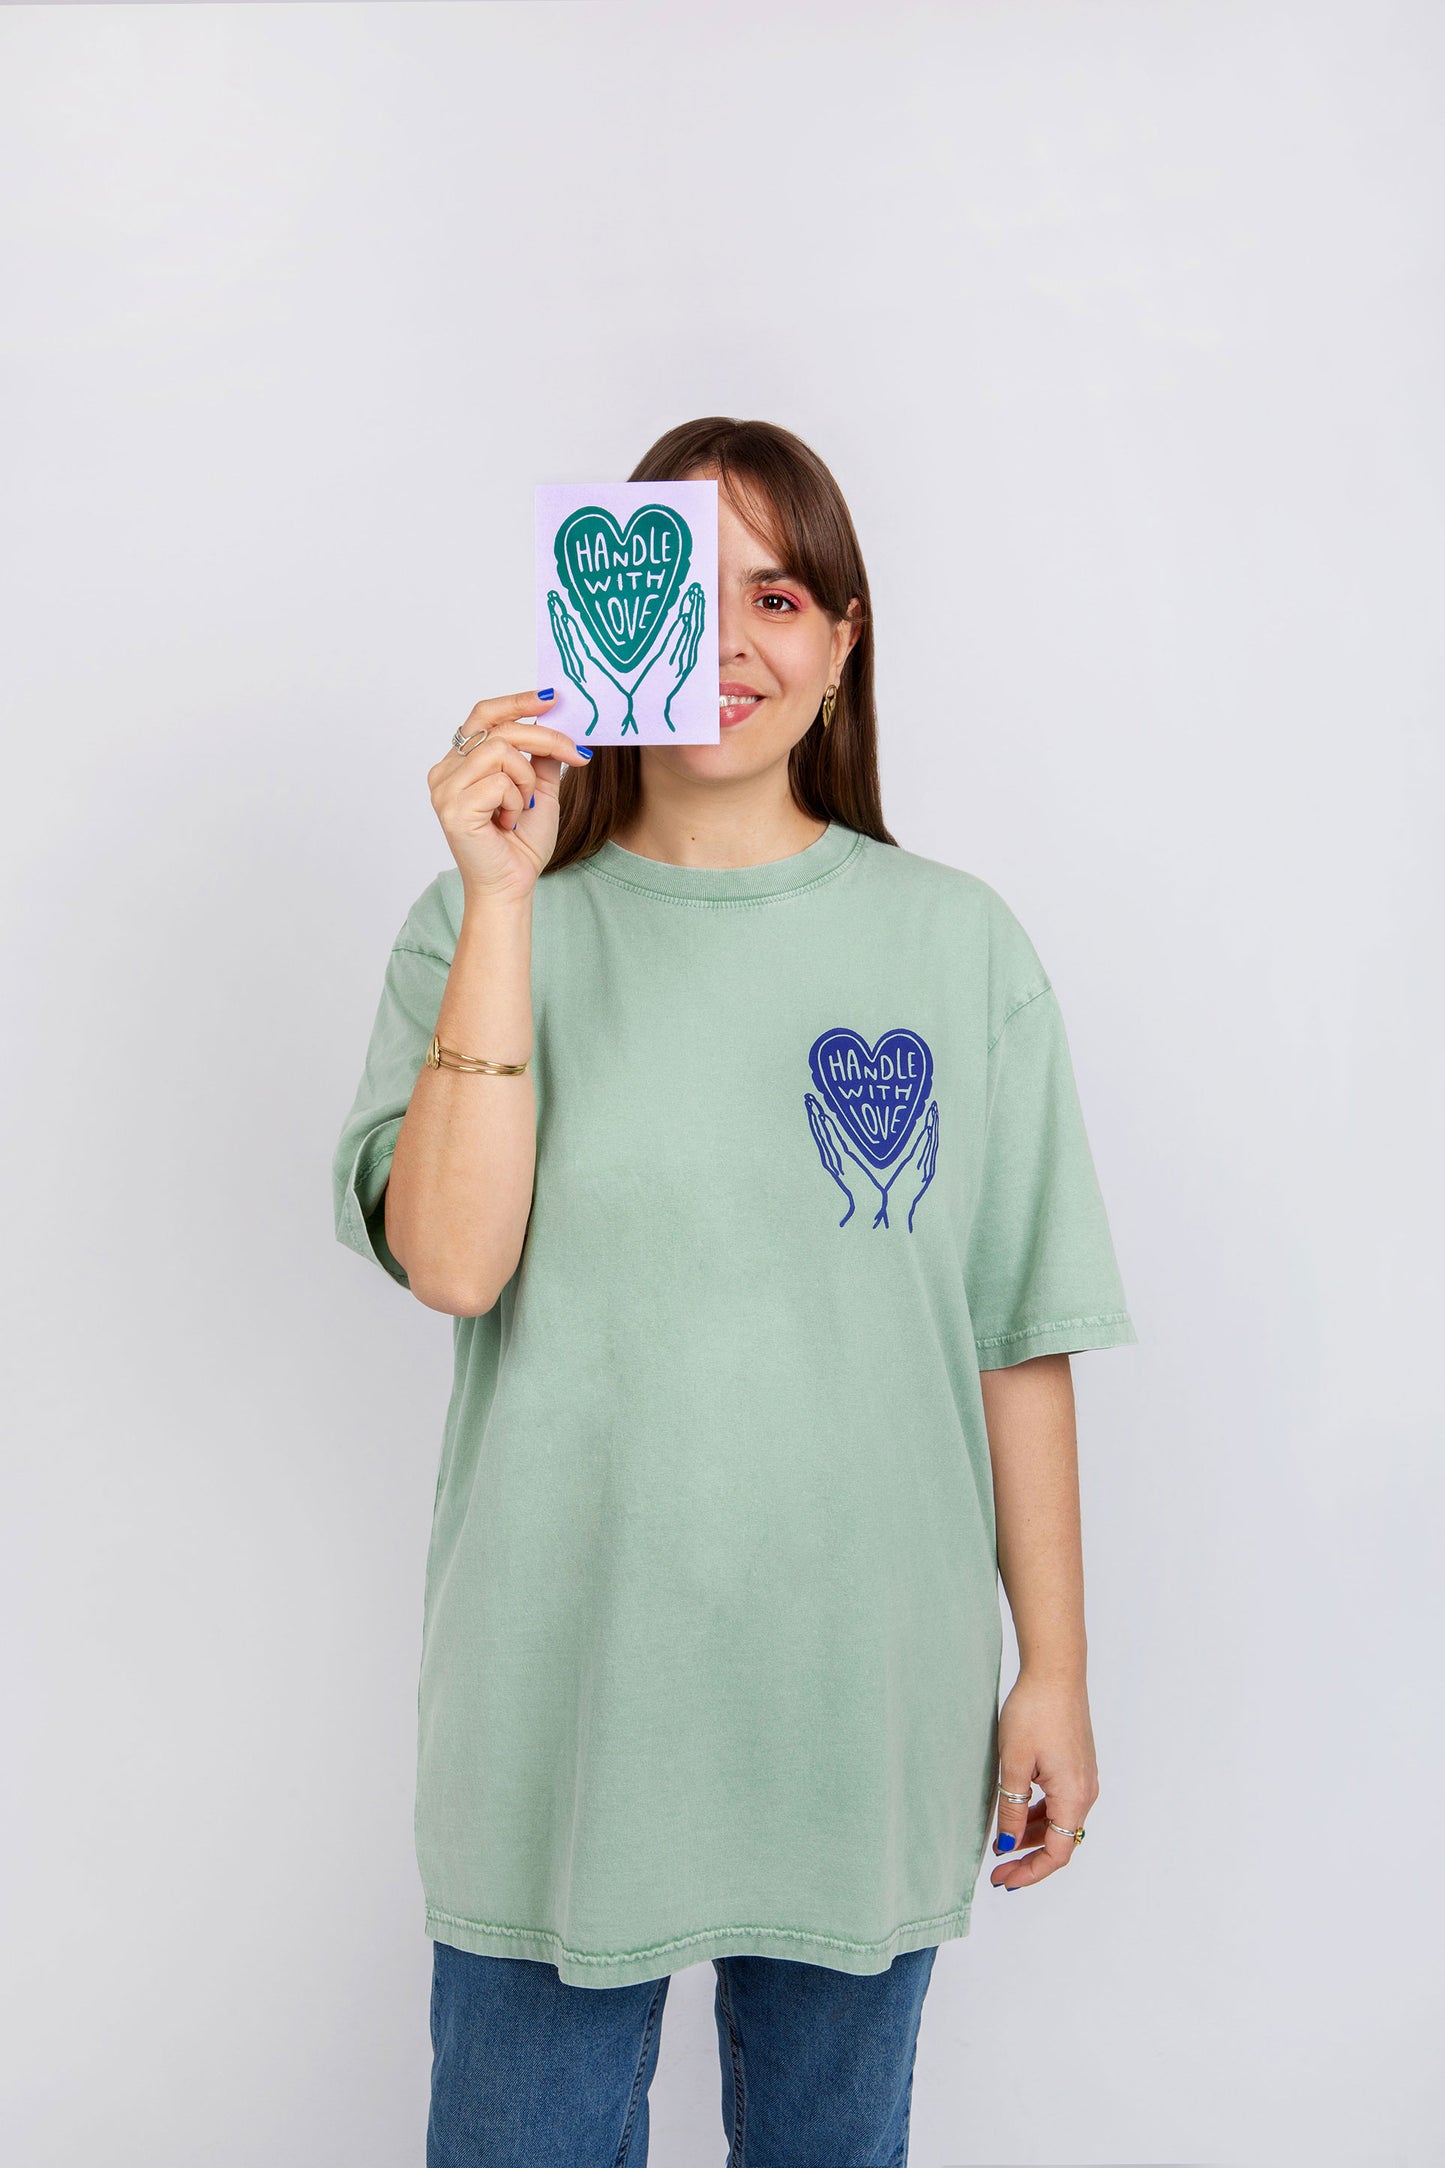 HANDLE WITH LOVE OVERSIZED T-SHIRT